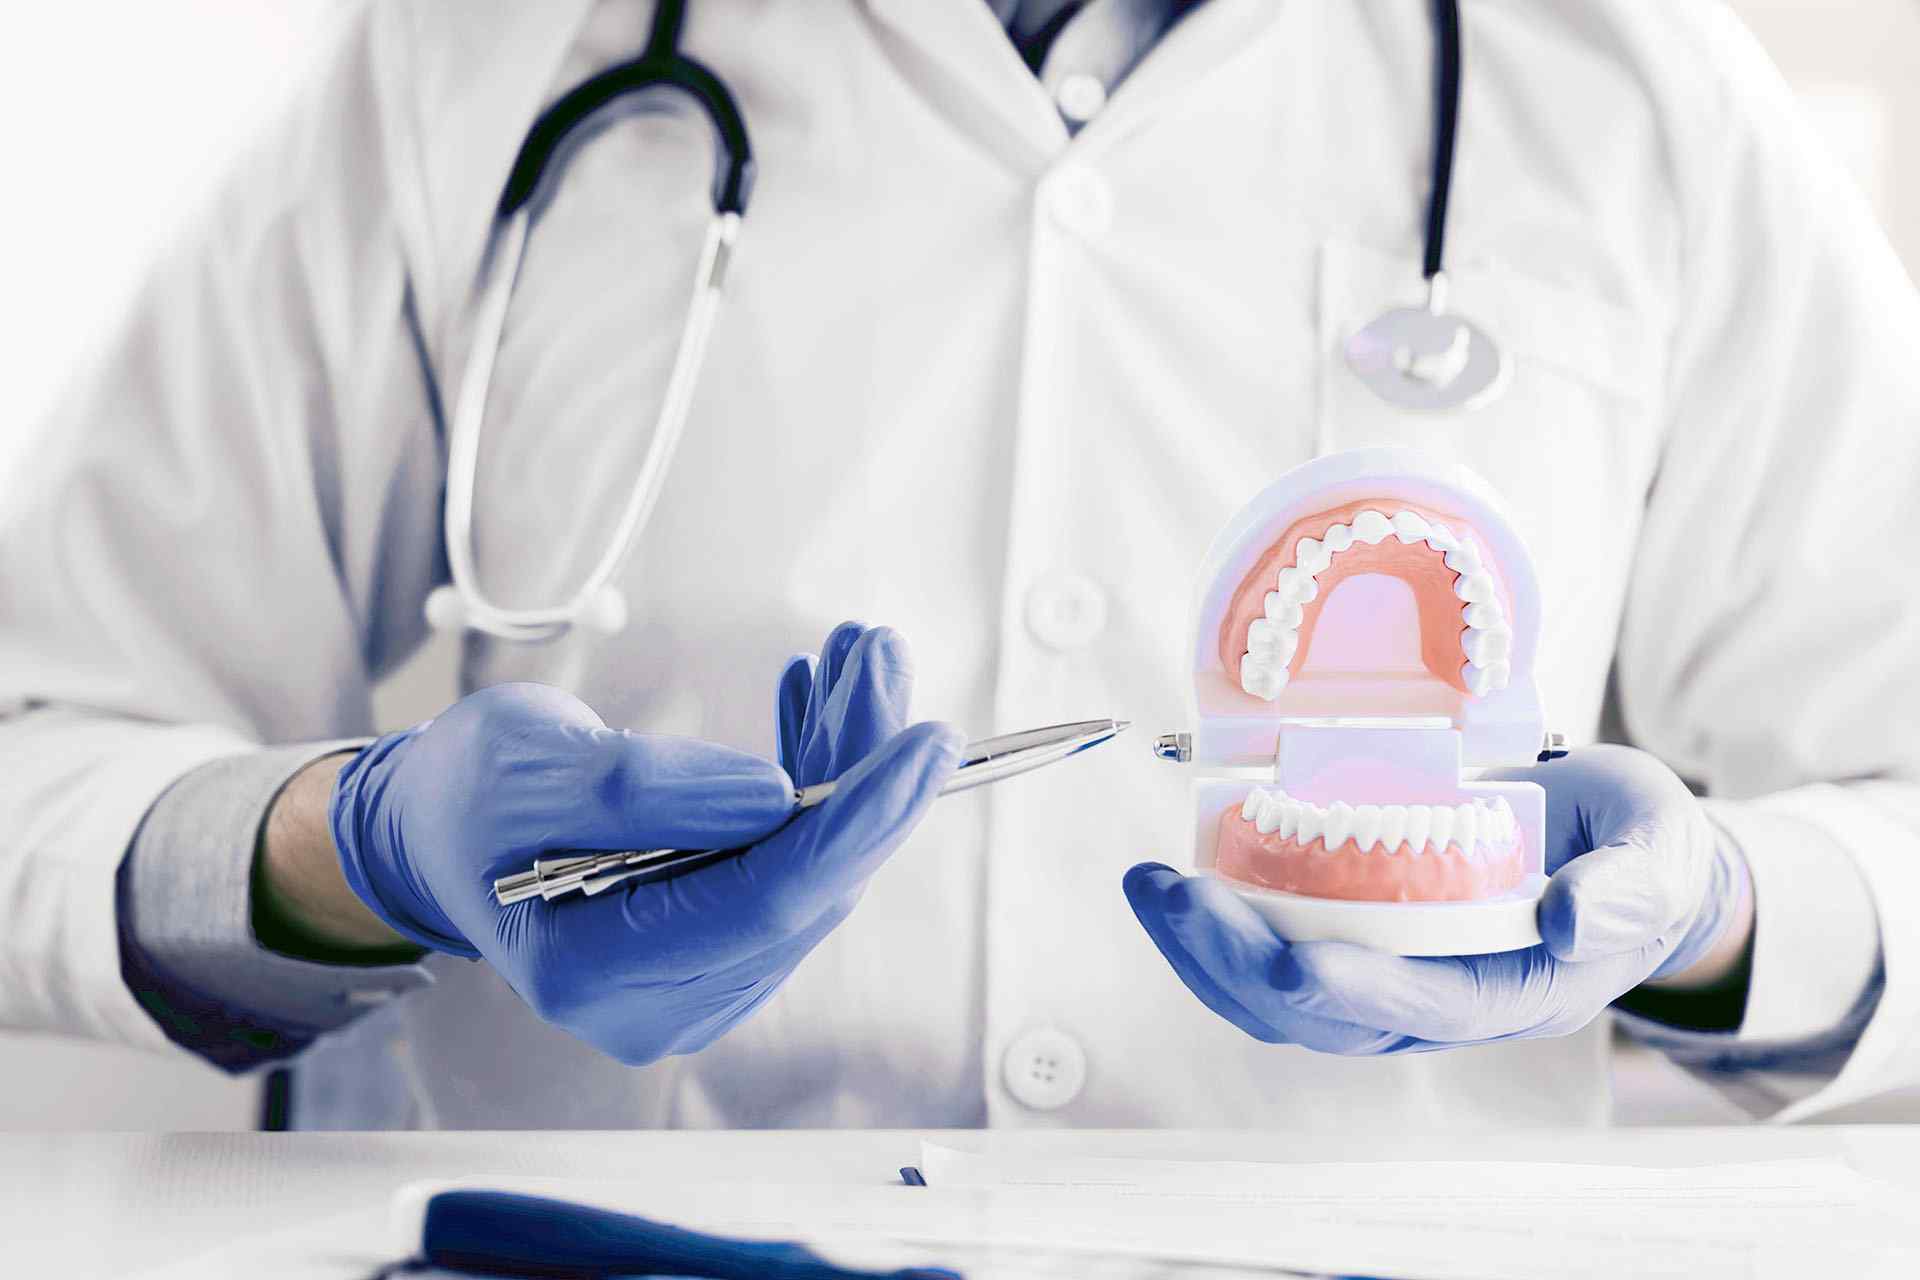 A doctor holding a tooth model and a pair of blue gloves.